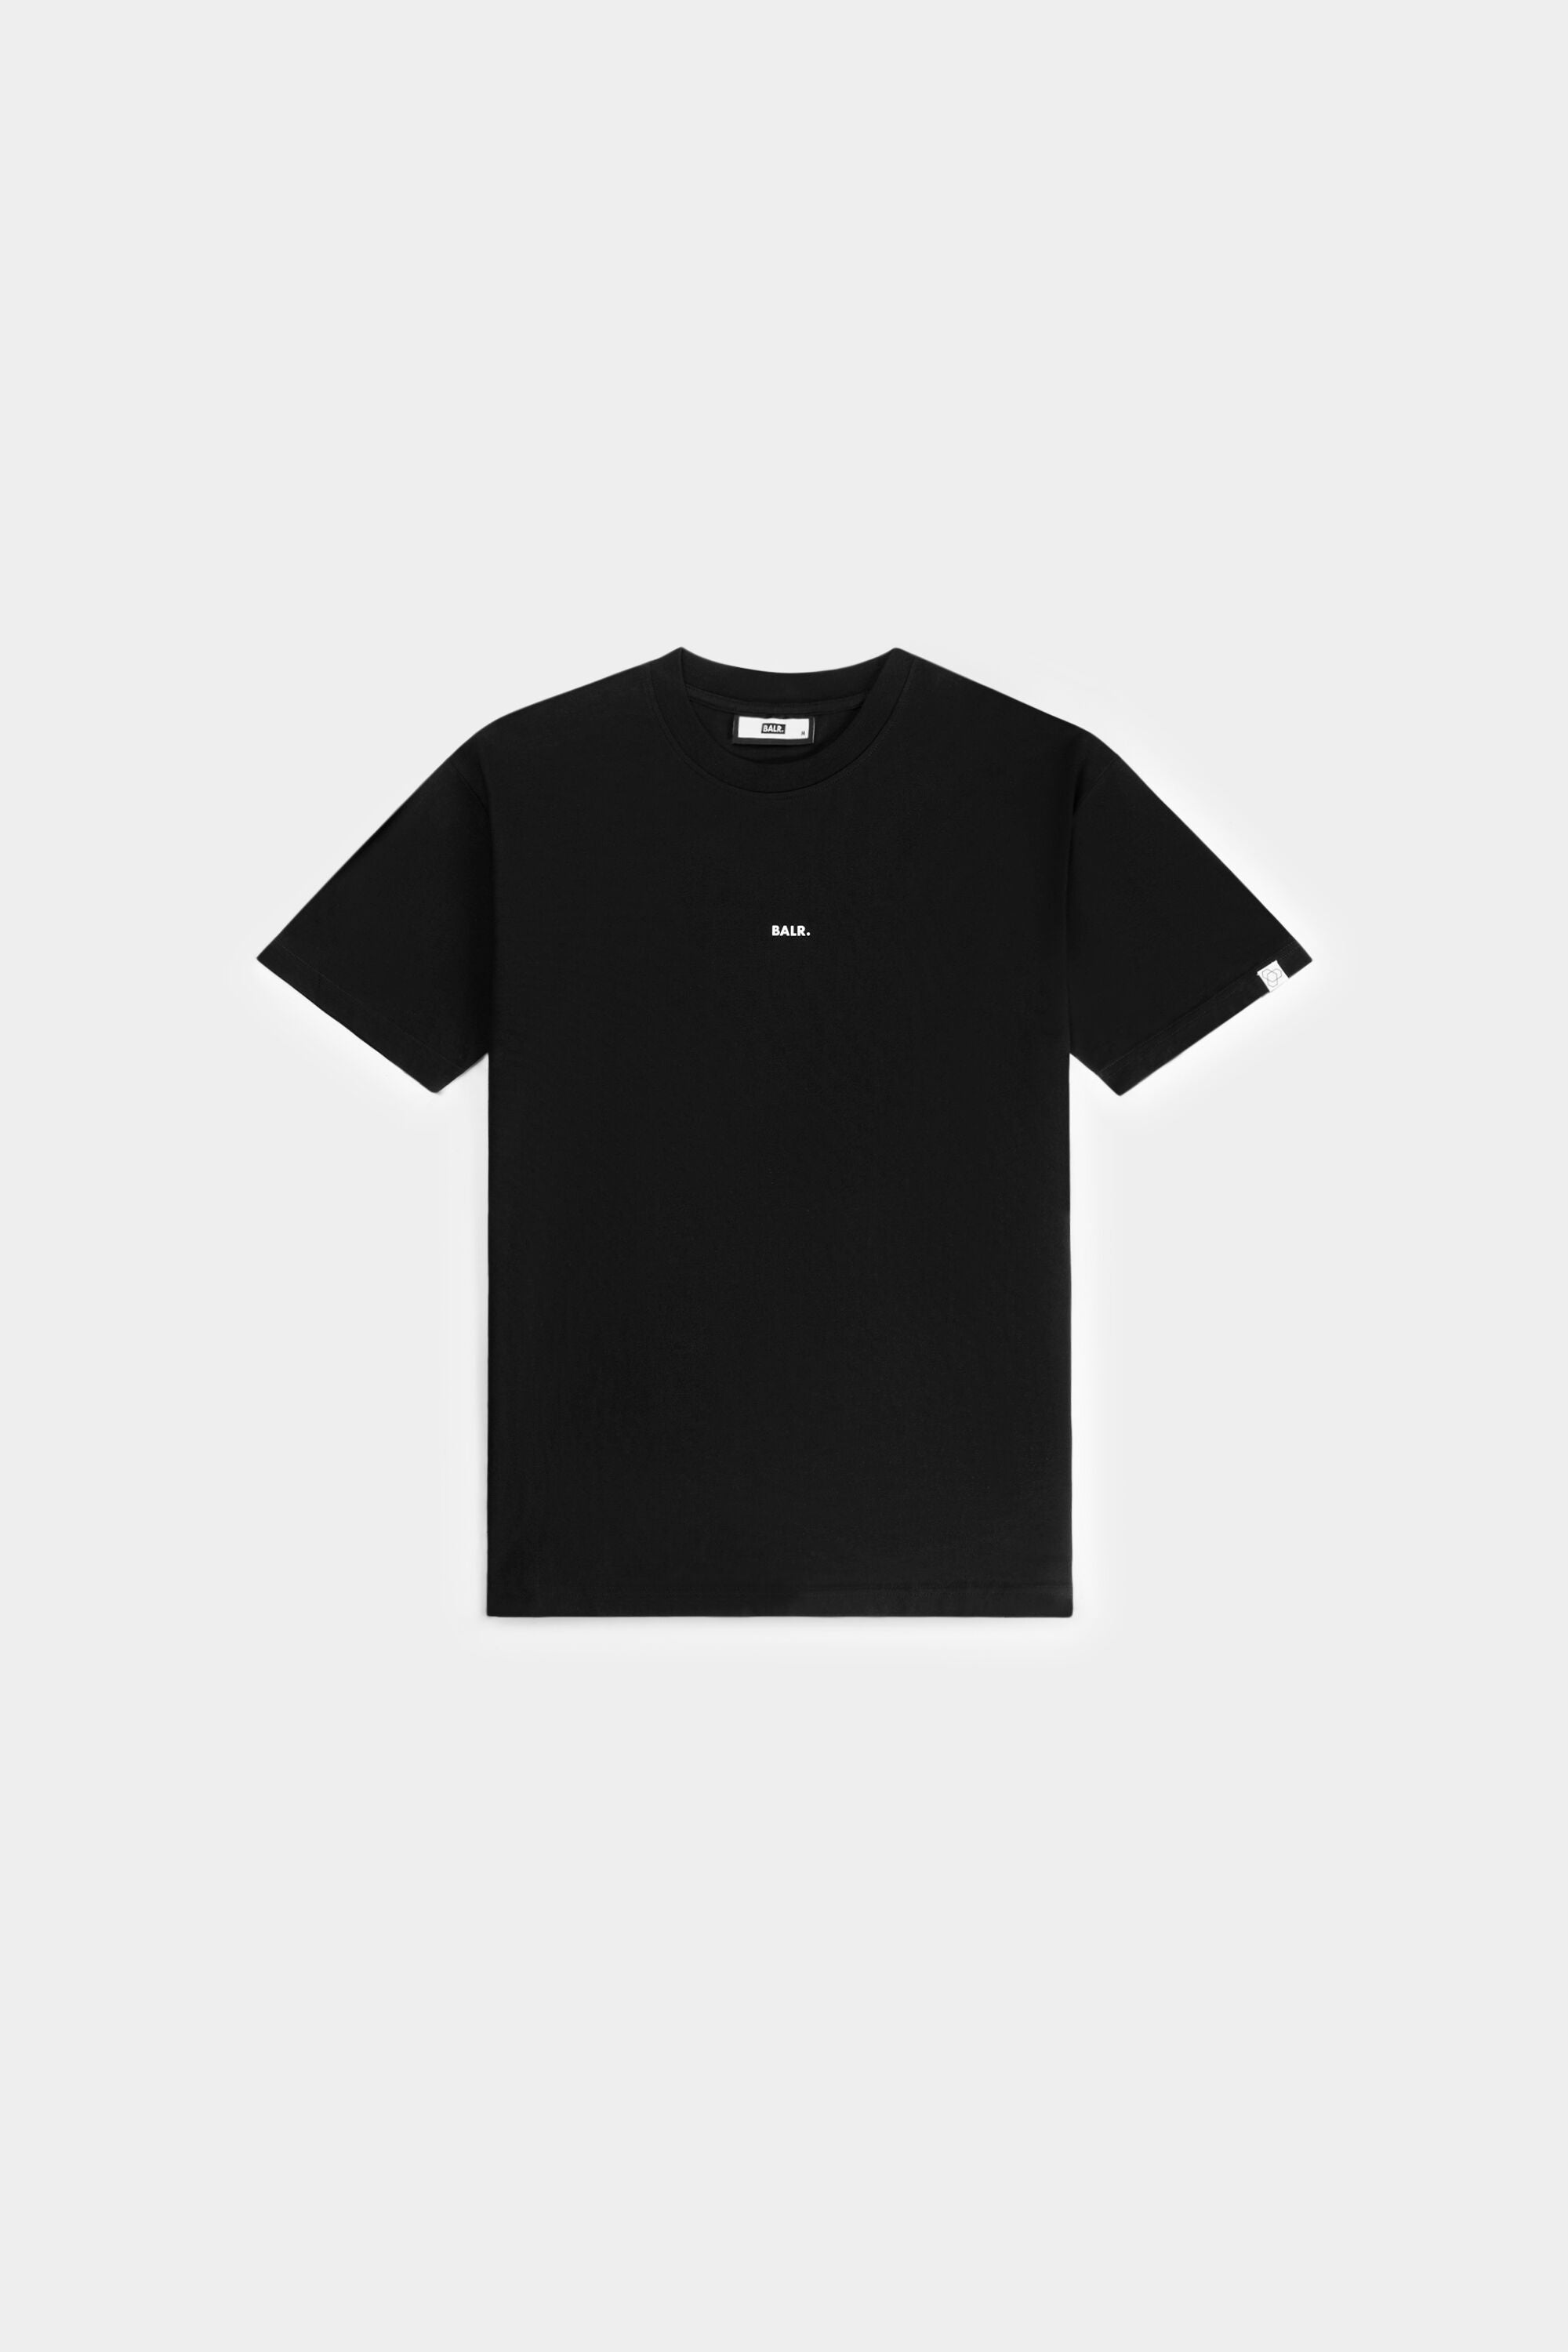 Superme Black Tee for Mens and Womens : : Clothing